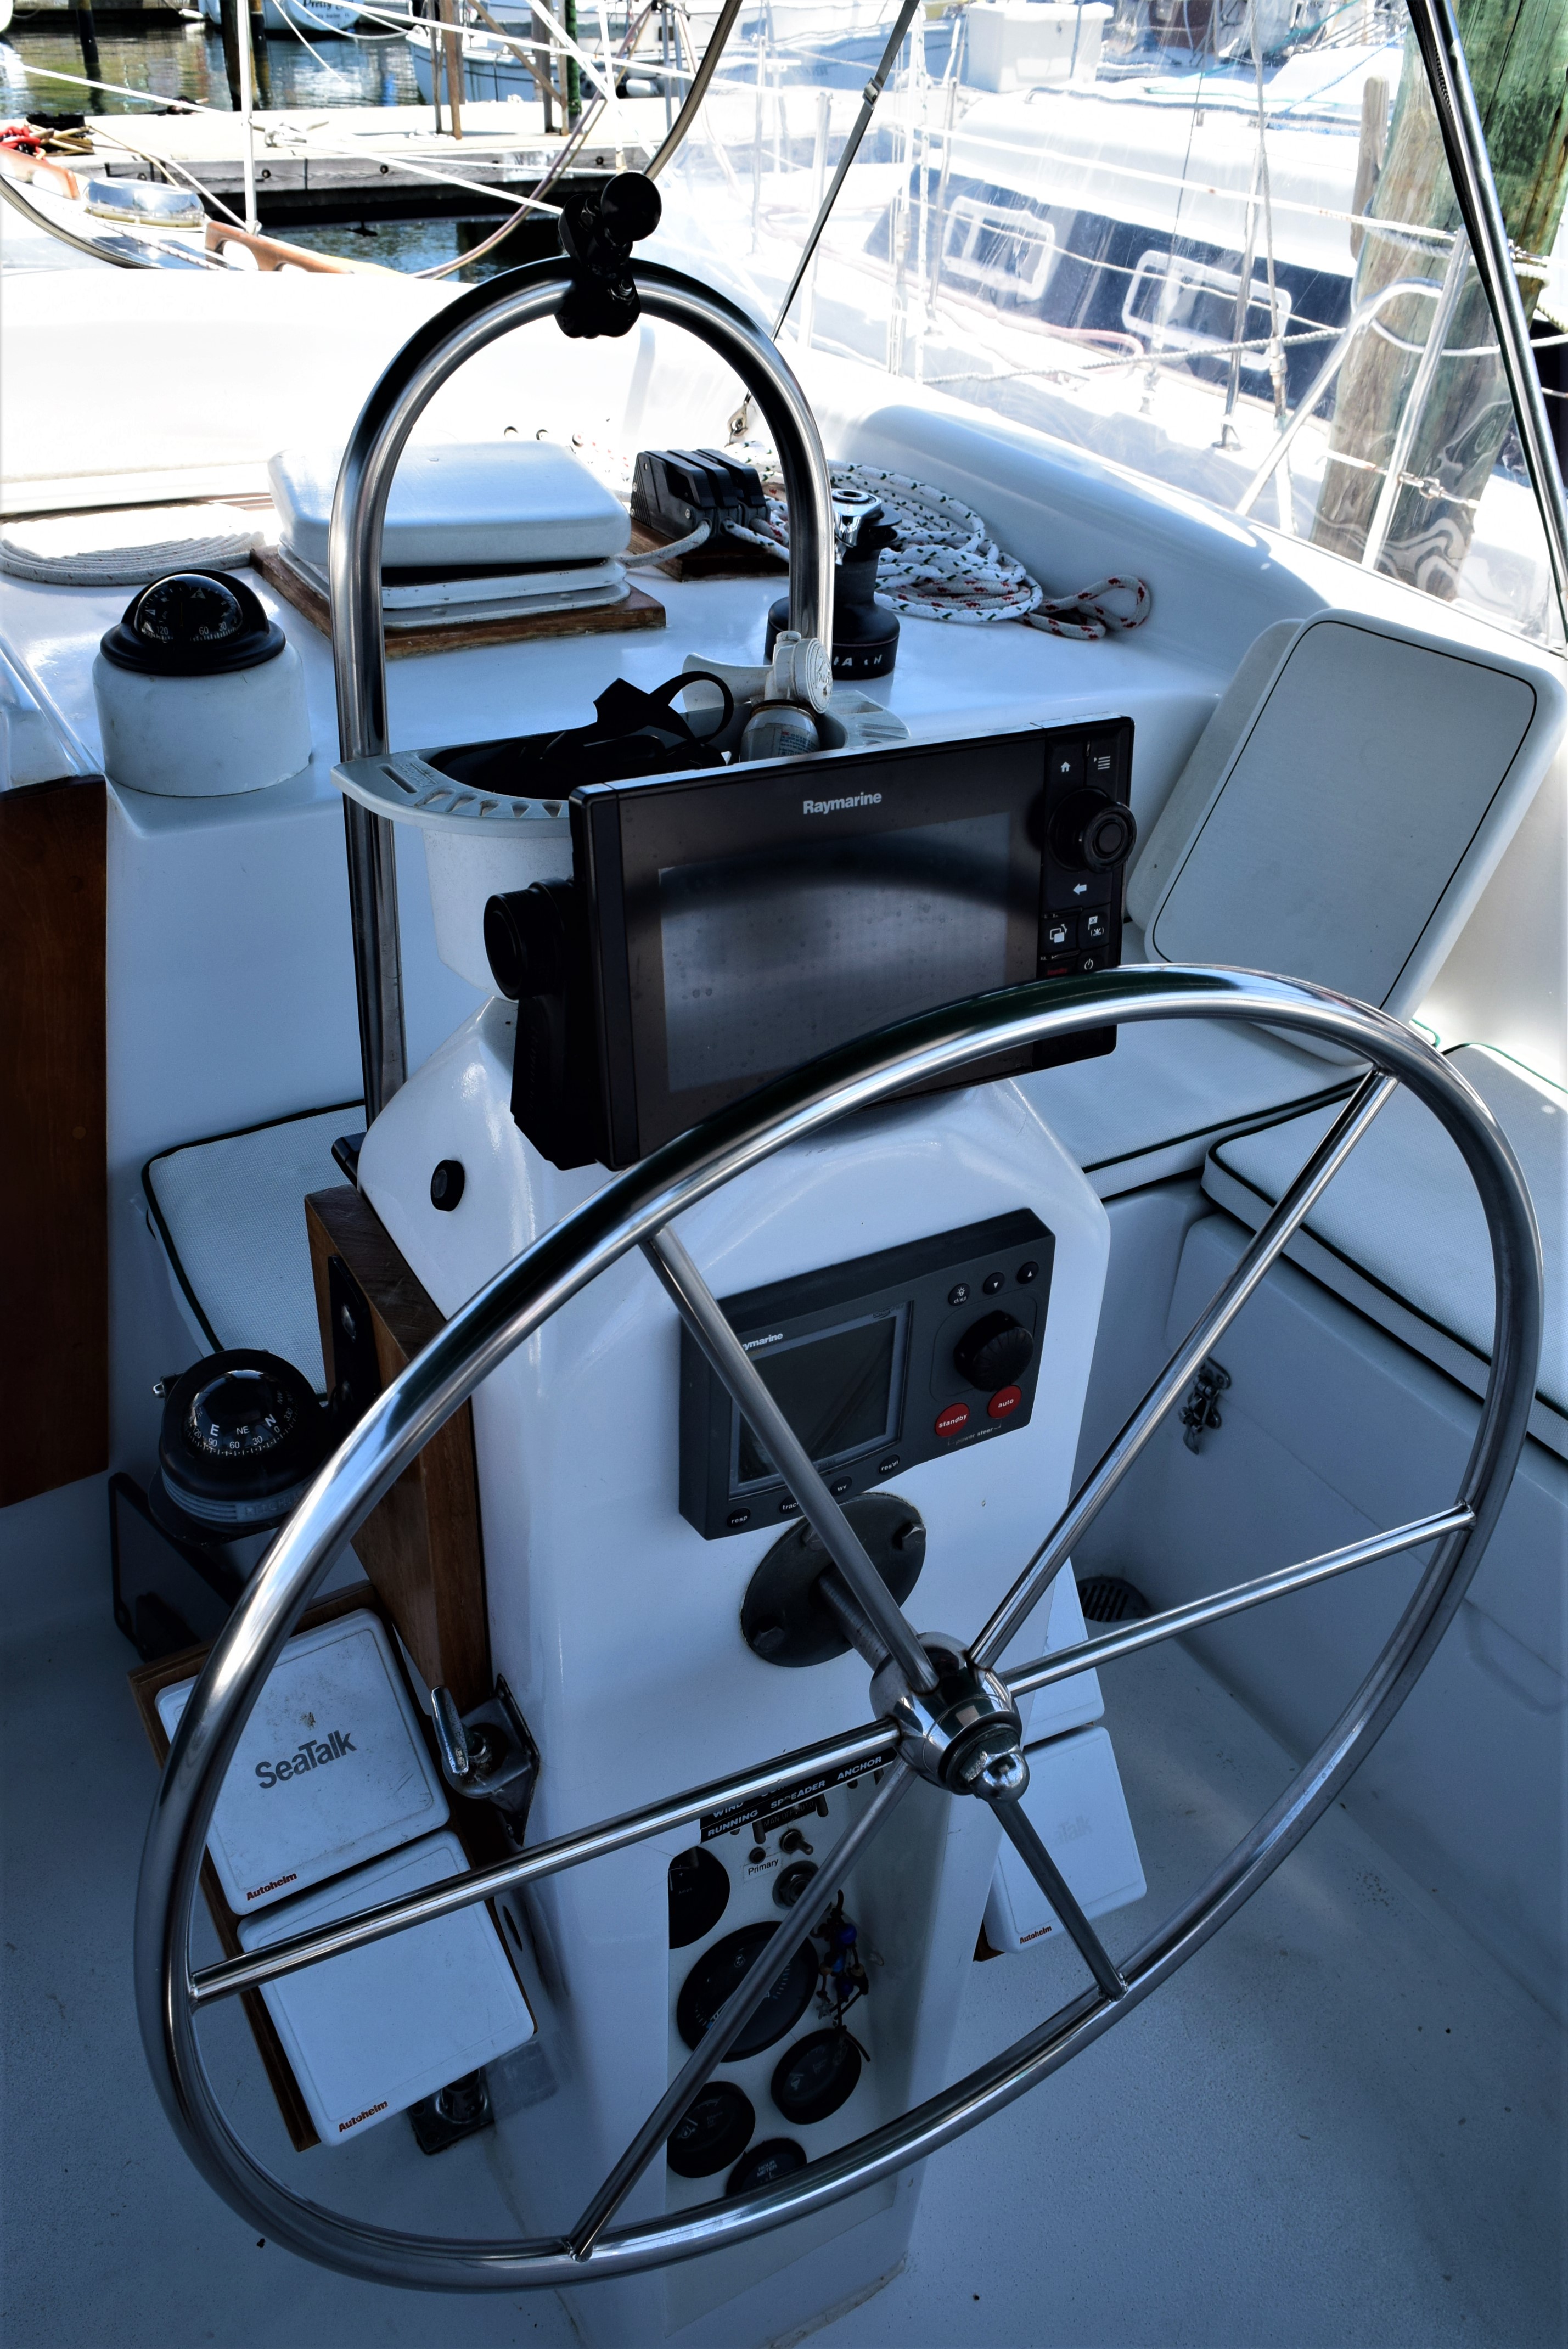 1979 Morgan 415 Out Island Ketch Sailboat for sale in St Petersburg, FL - image 19 